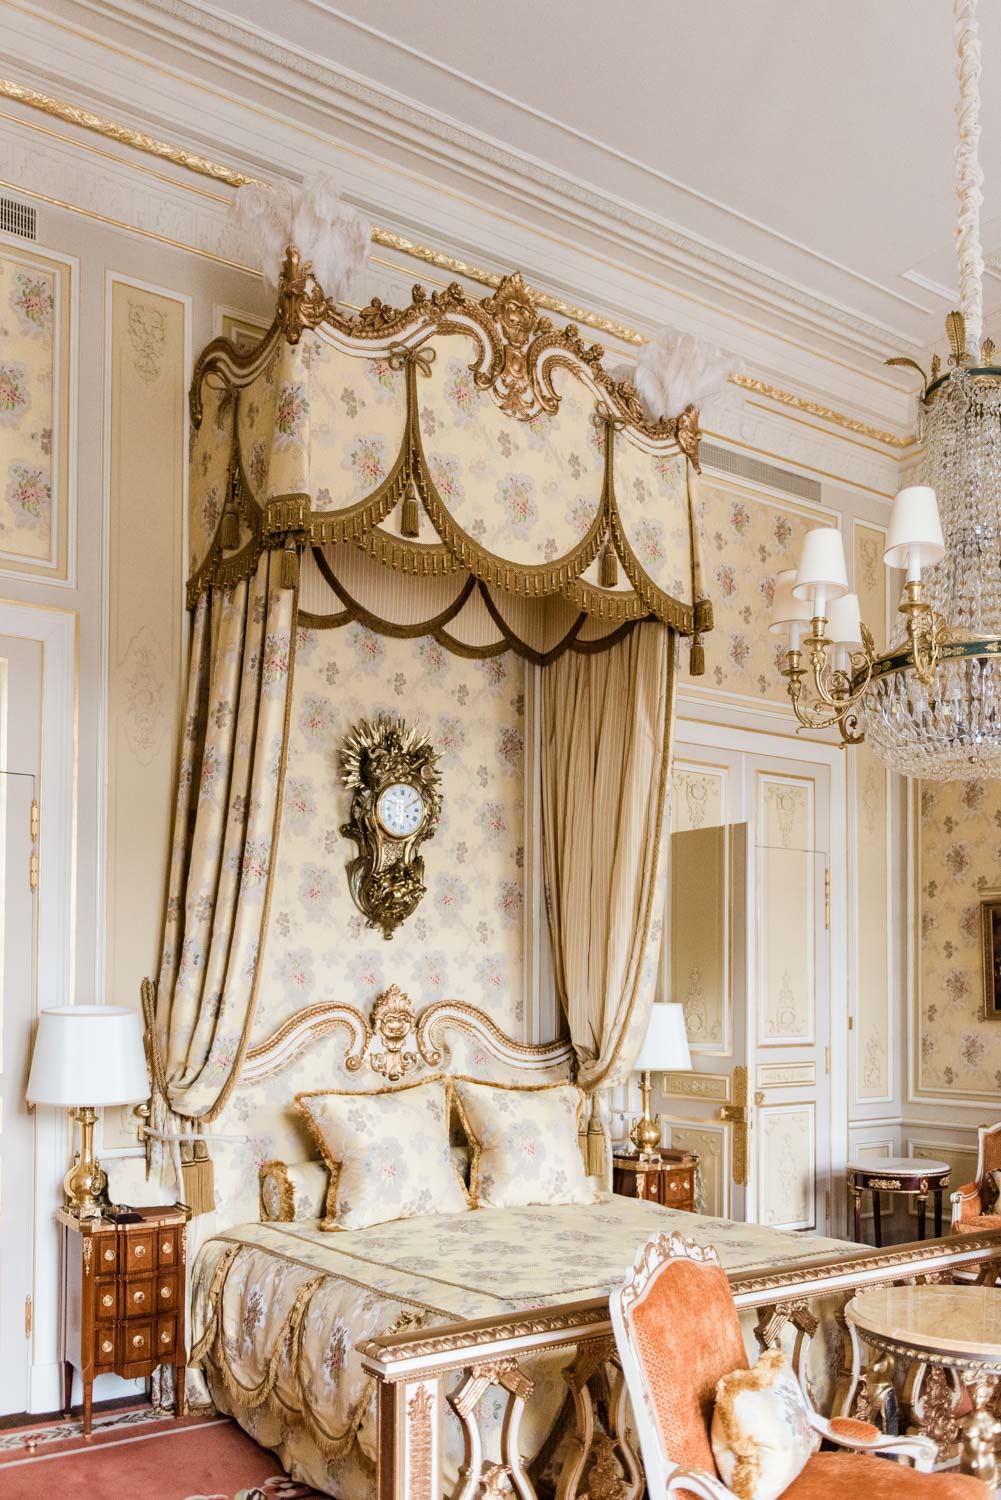 The Suite Imperial in The Ritz Hotel in Paris, a replica of Marie Antoinette's suite at Versailles